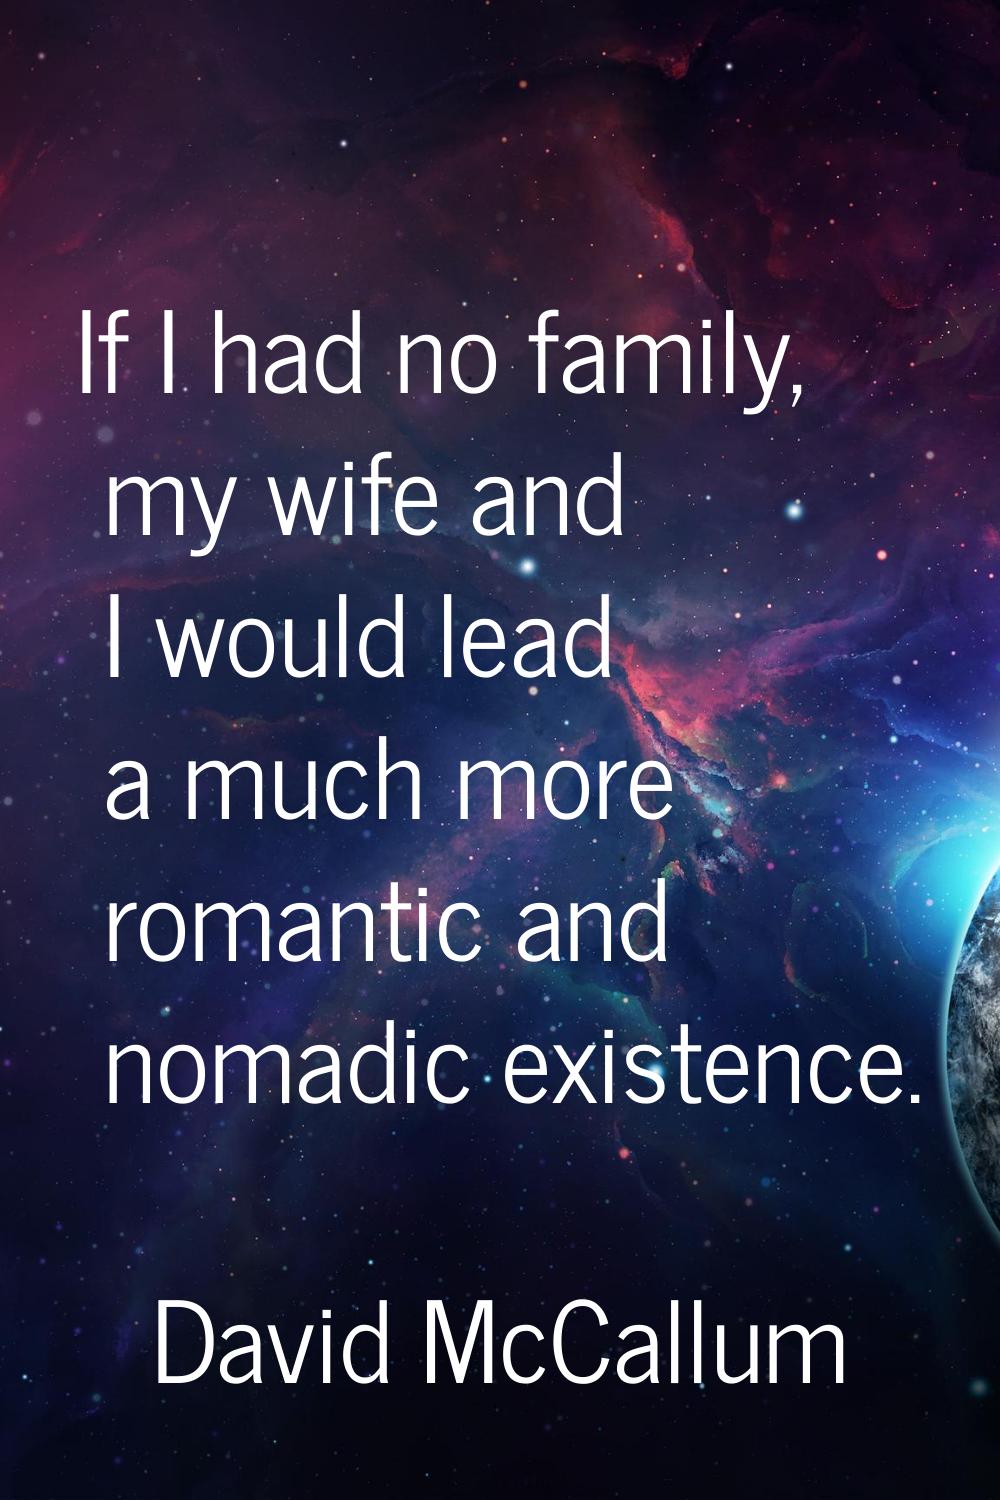 If I had no family, my wife and I would lead a much more romantic and nomadic existence.